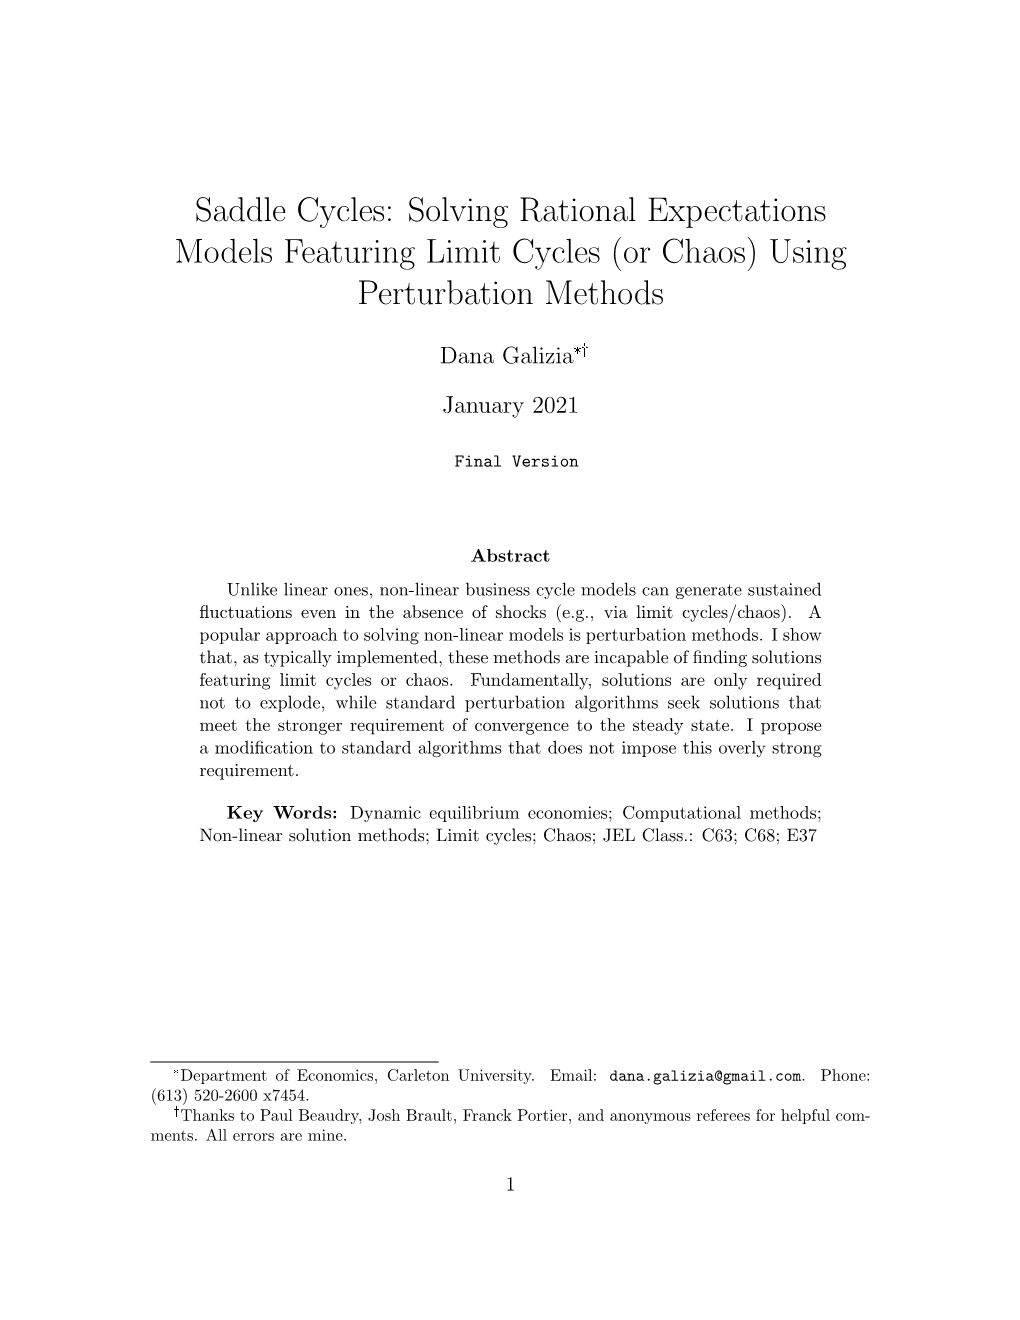 Solving Rational Expectations Models Featuring Limit Cycles (Or Chaos) Using Perturbation Methods